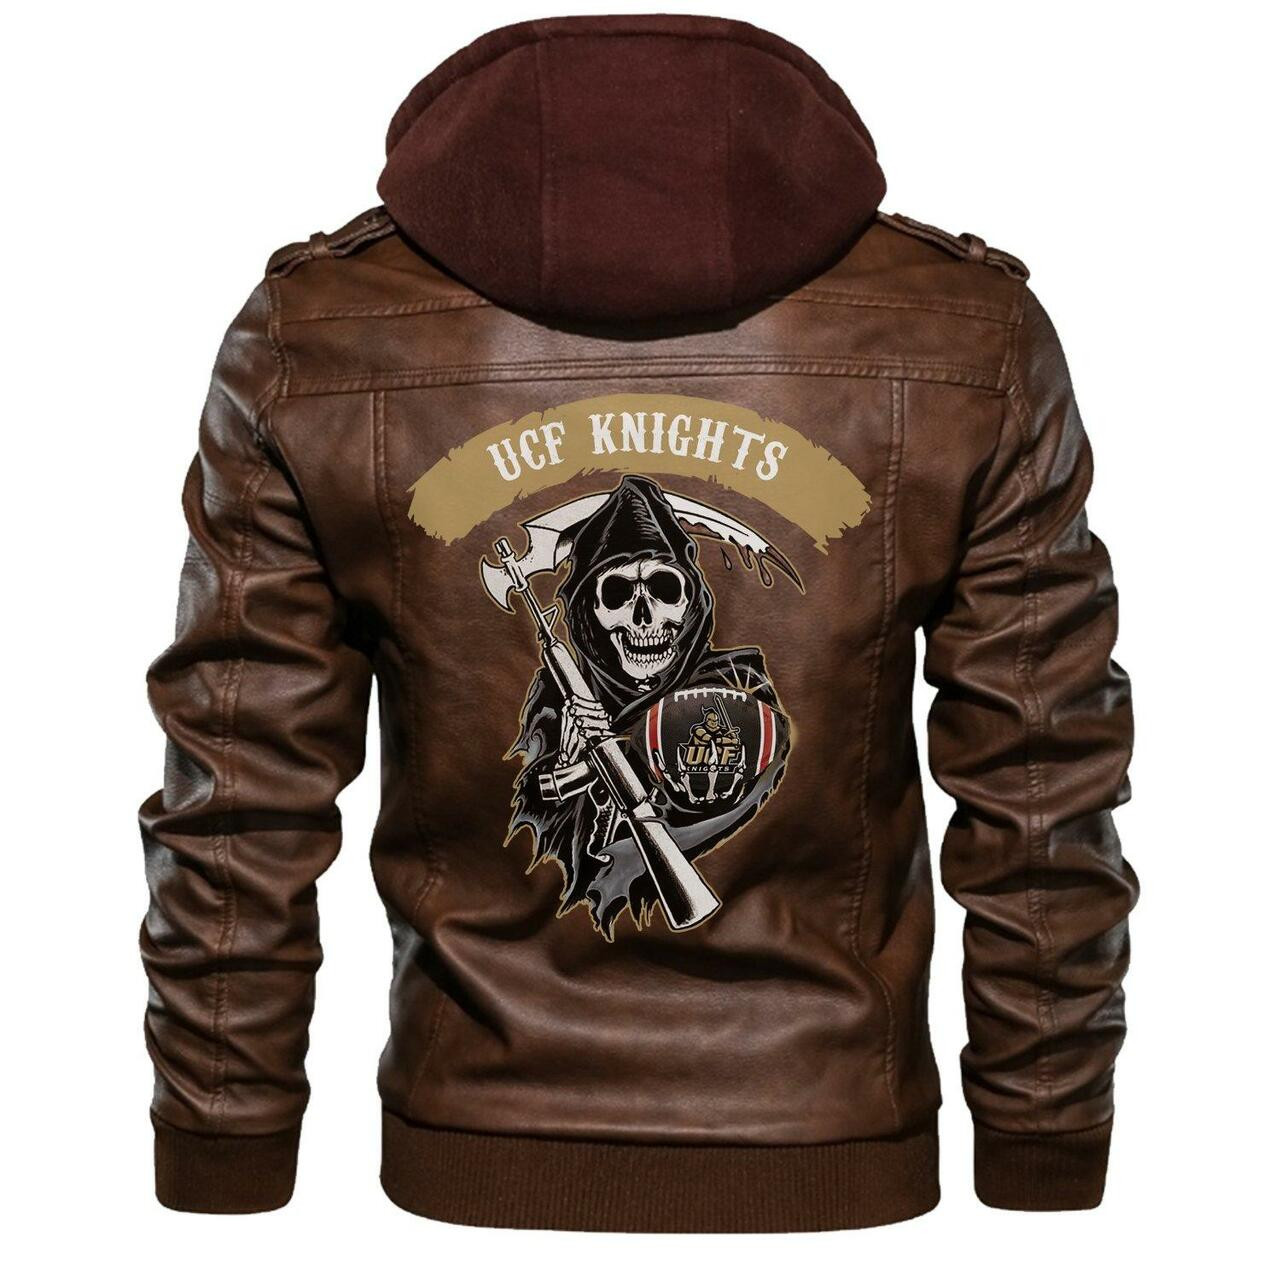 To get a great look, consider purchasing This New Leather Jacket 130